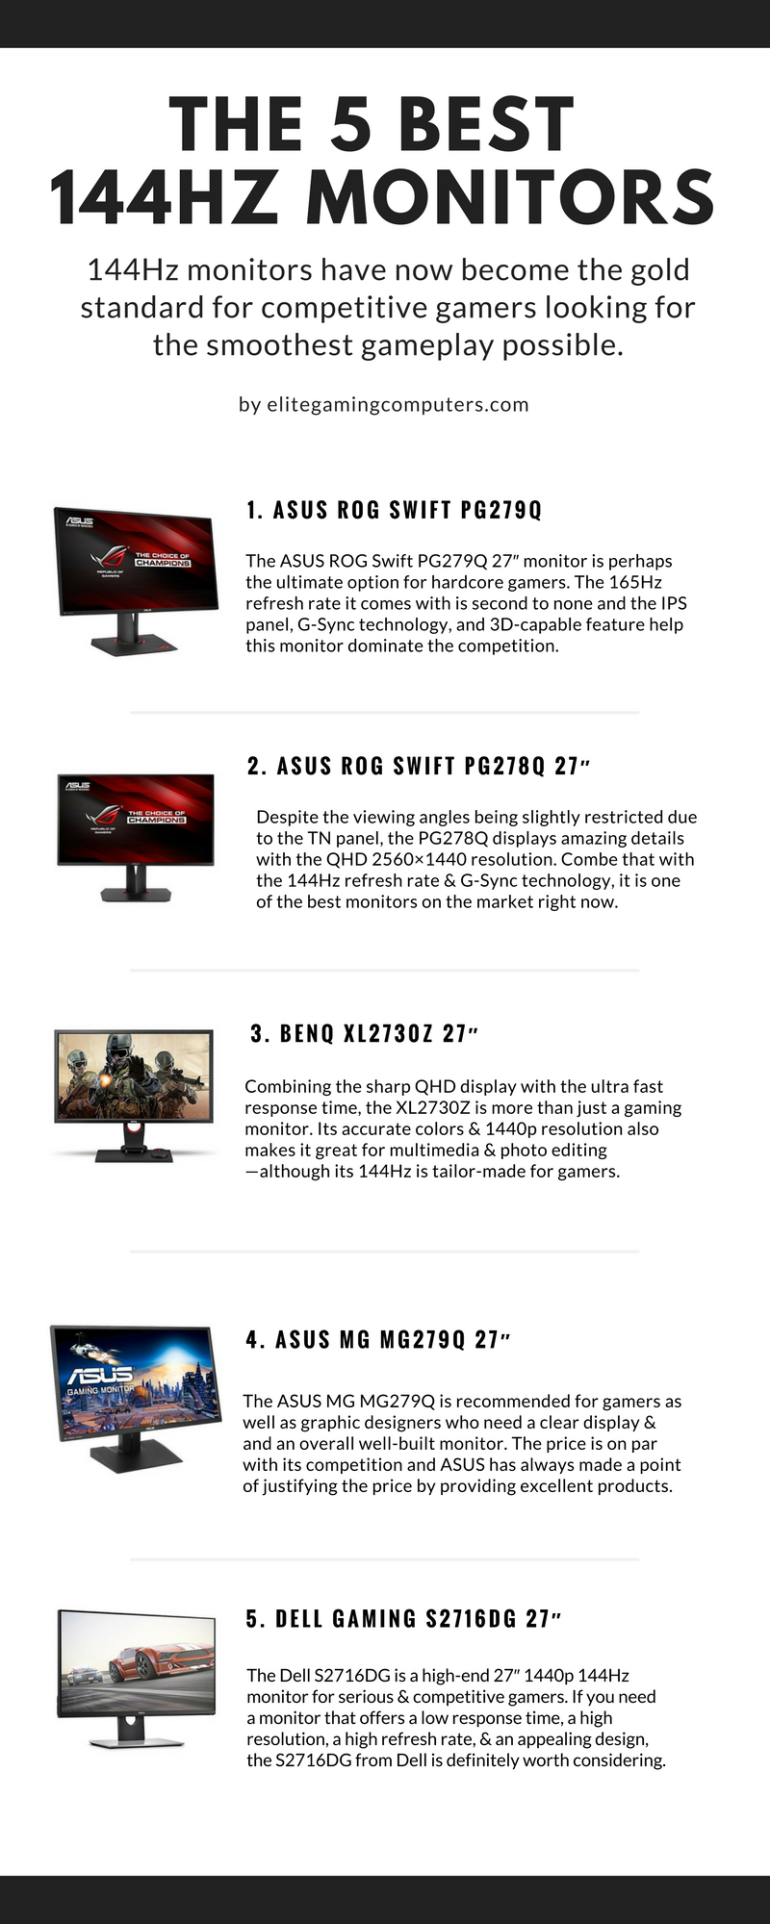 The Best 144Hz Monitors for Gaming